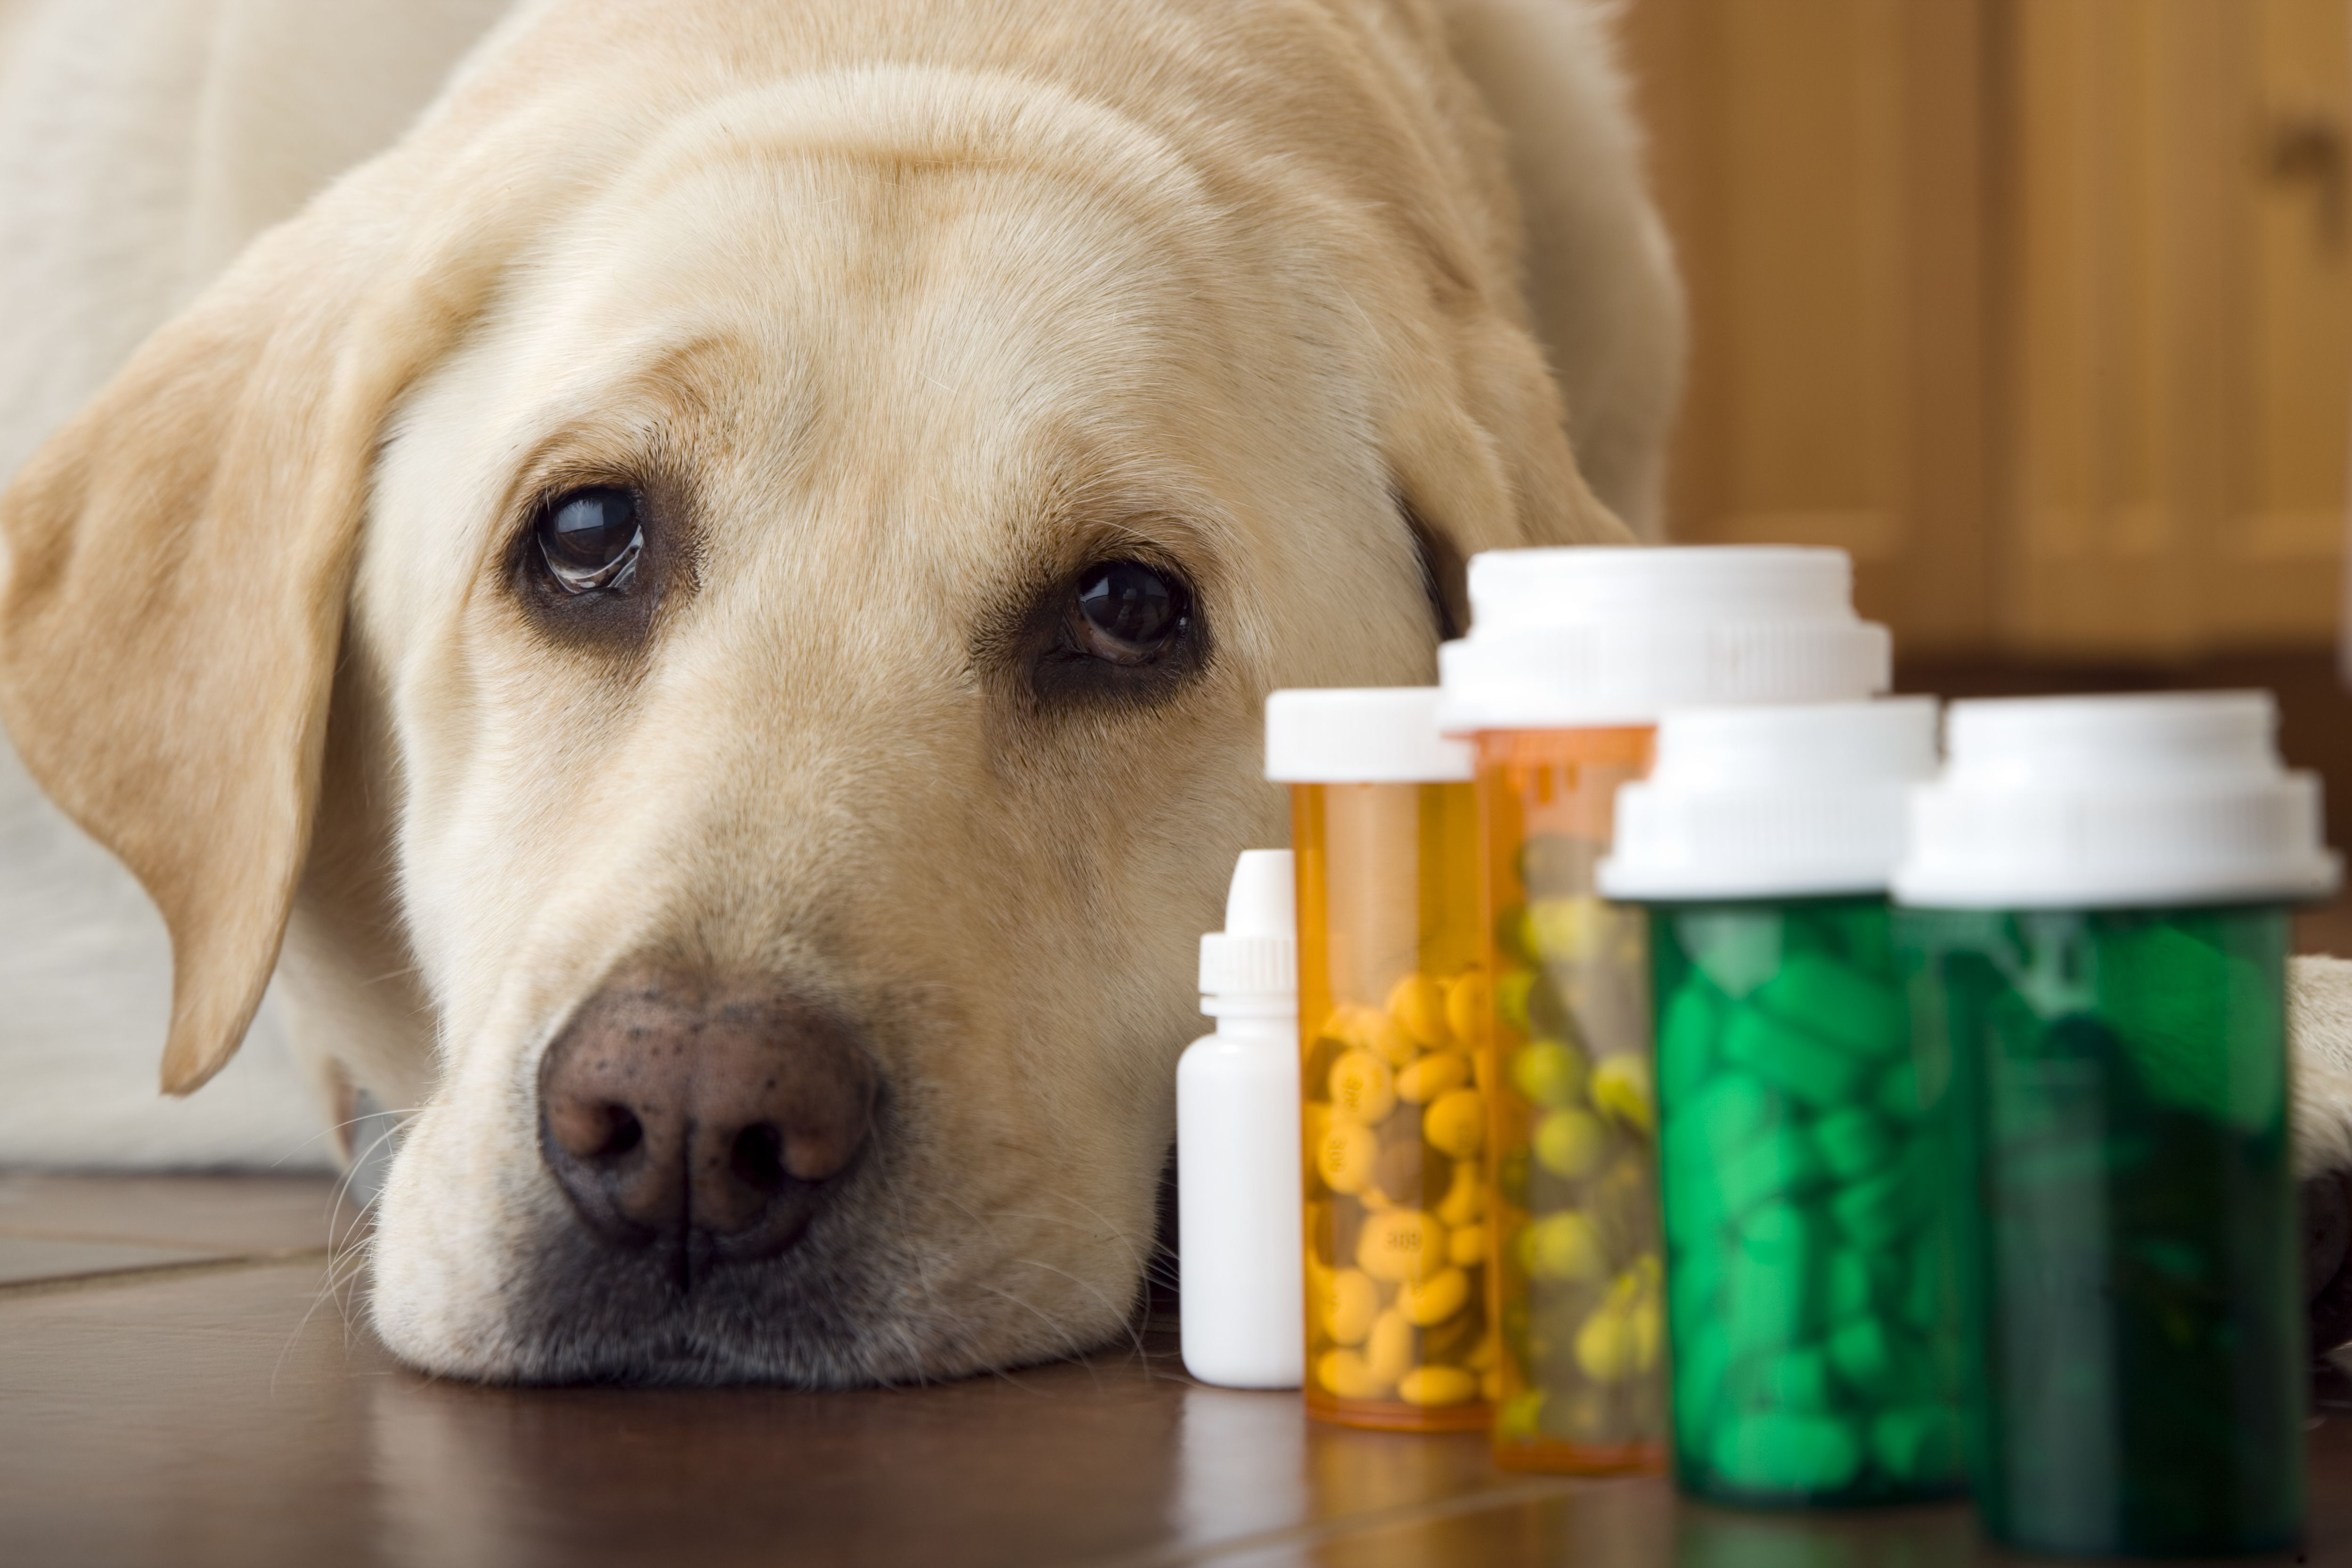 Labrador lying next to bottles of pills and medication